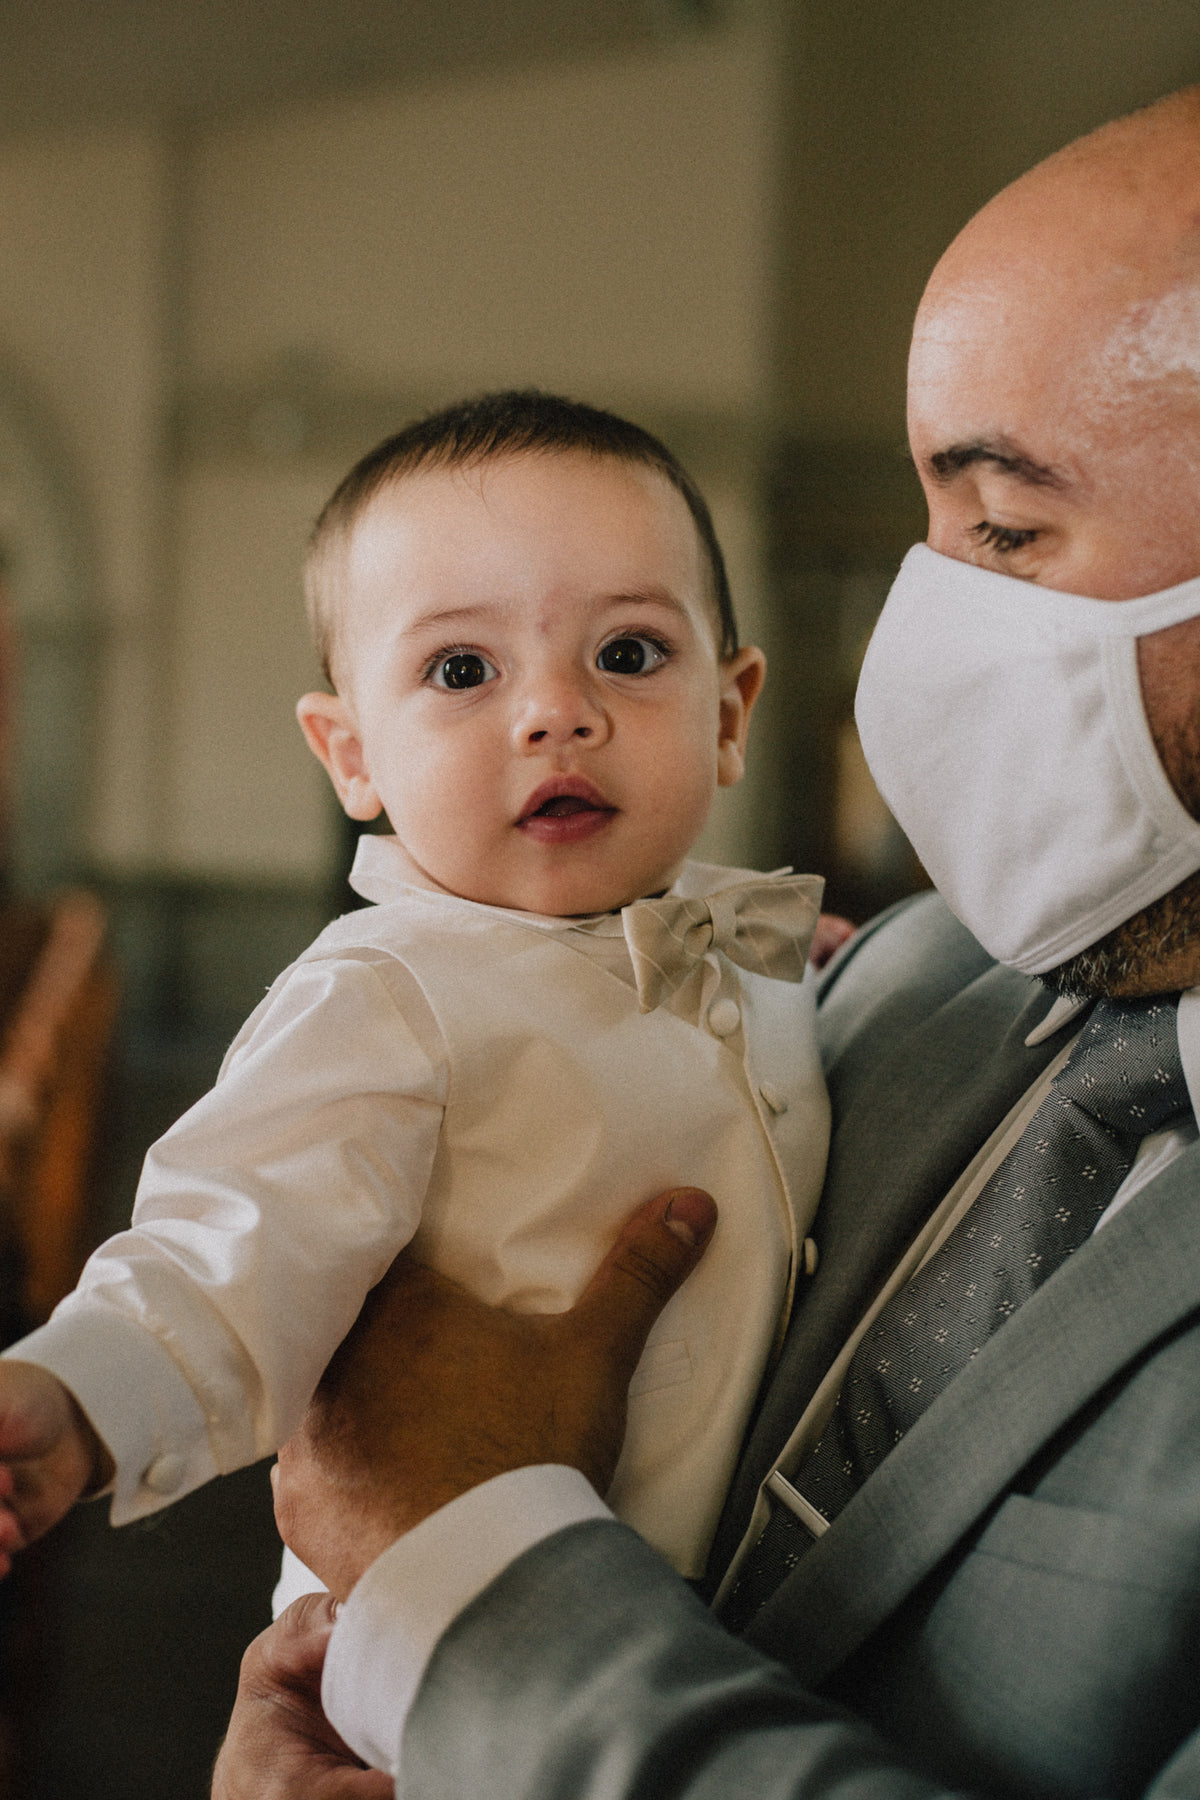 person in grey suit and facemask holds a young baby